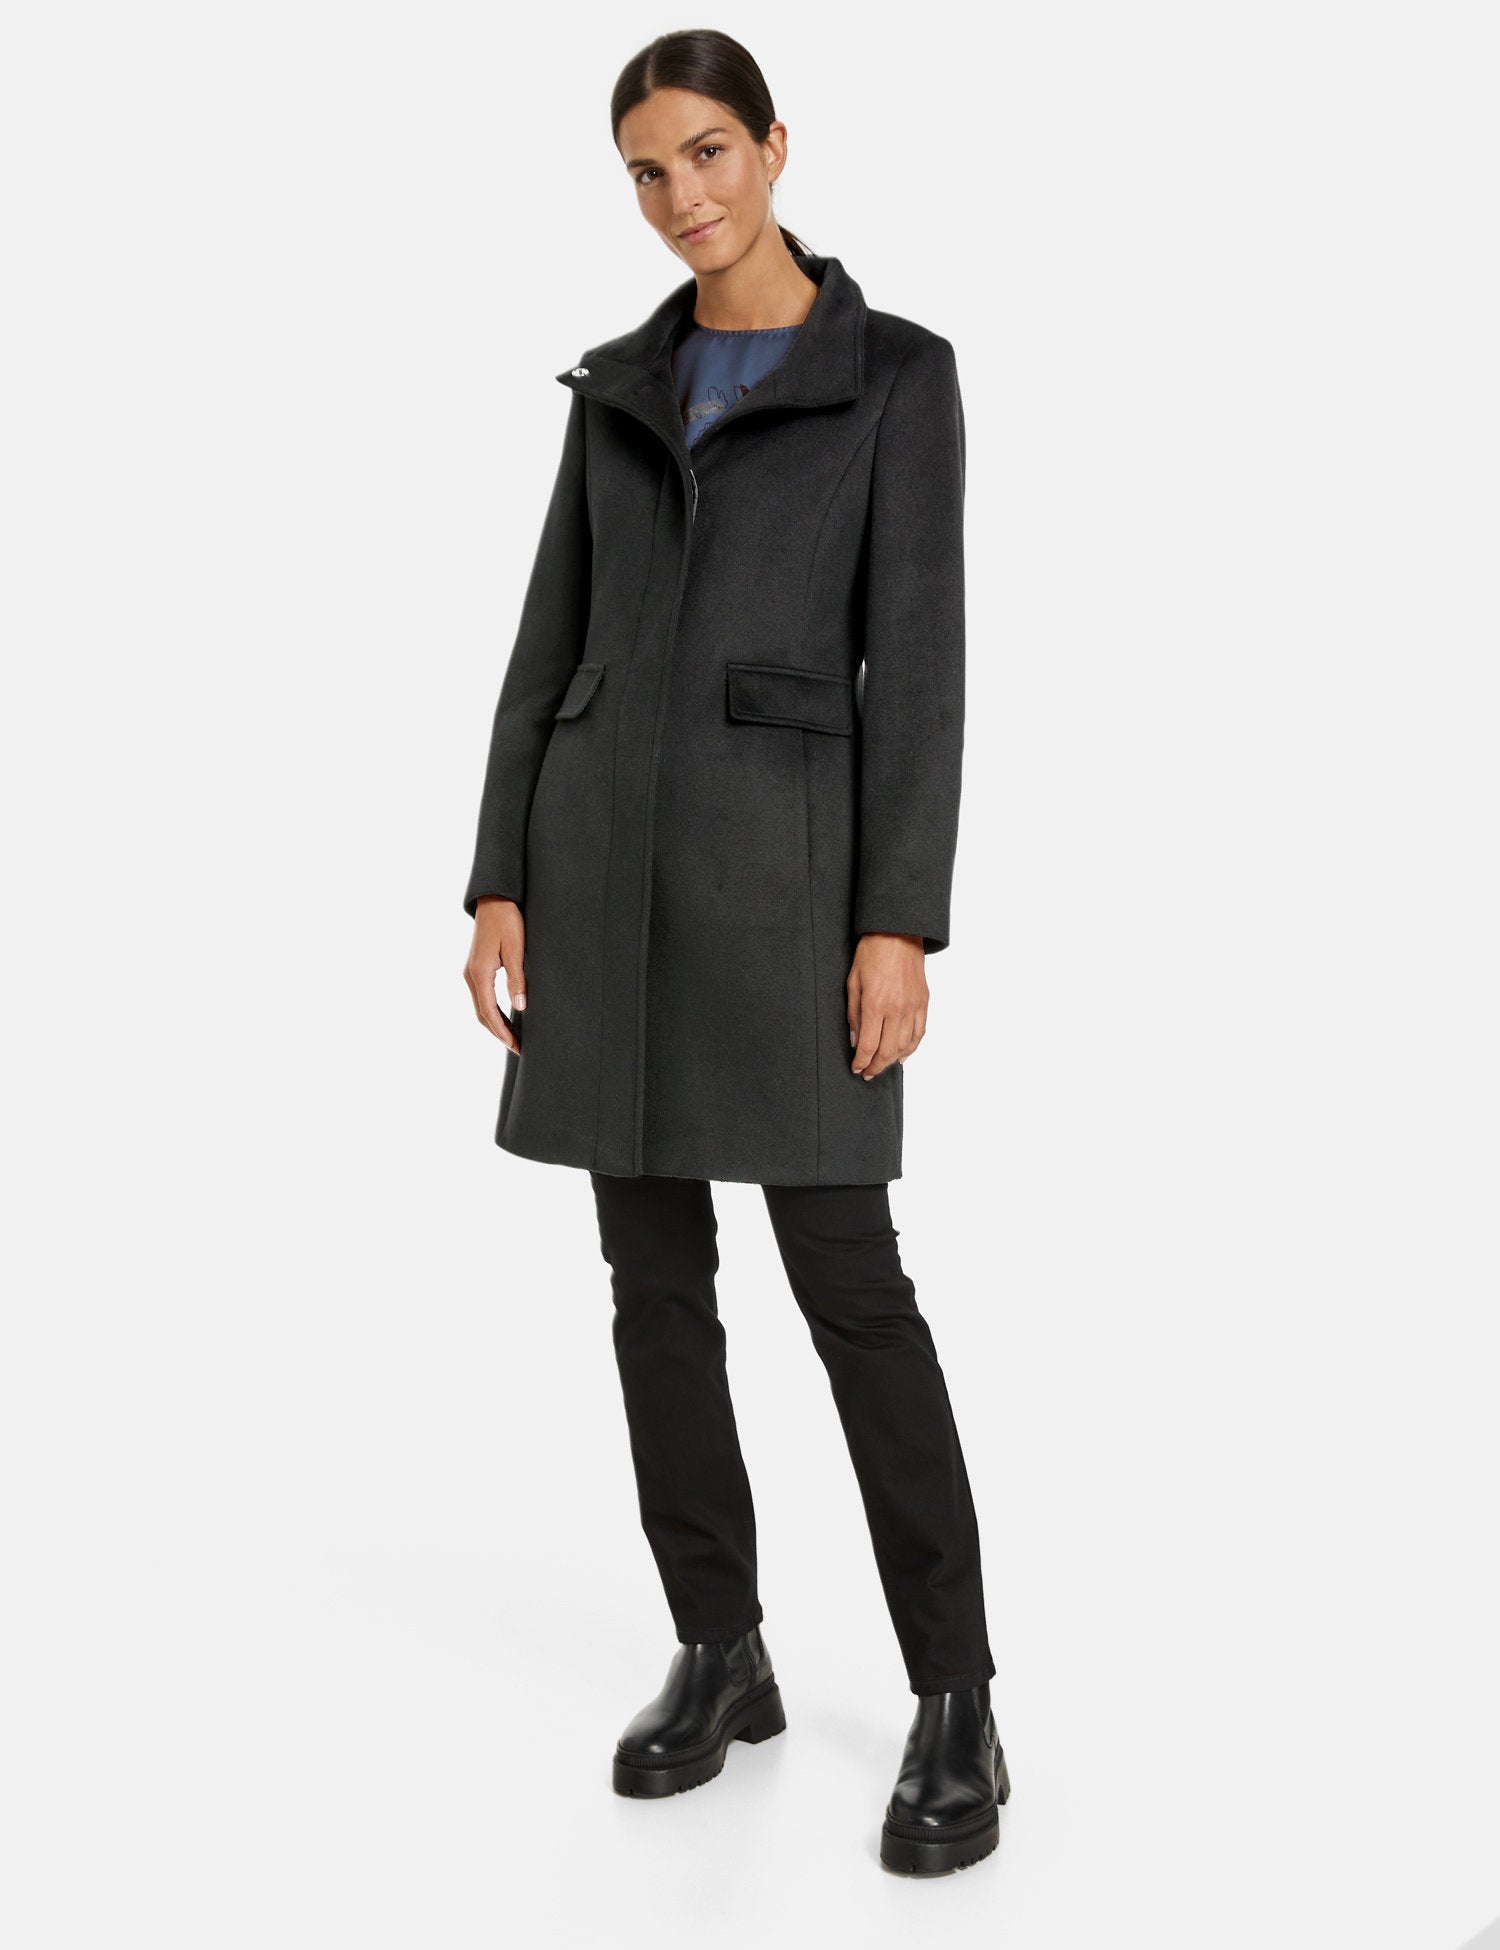 Short Wool Coat With A Stand Up Collar_250235-31131_11000_07